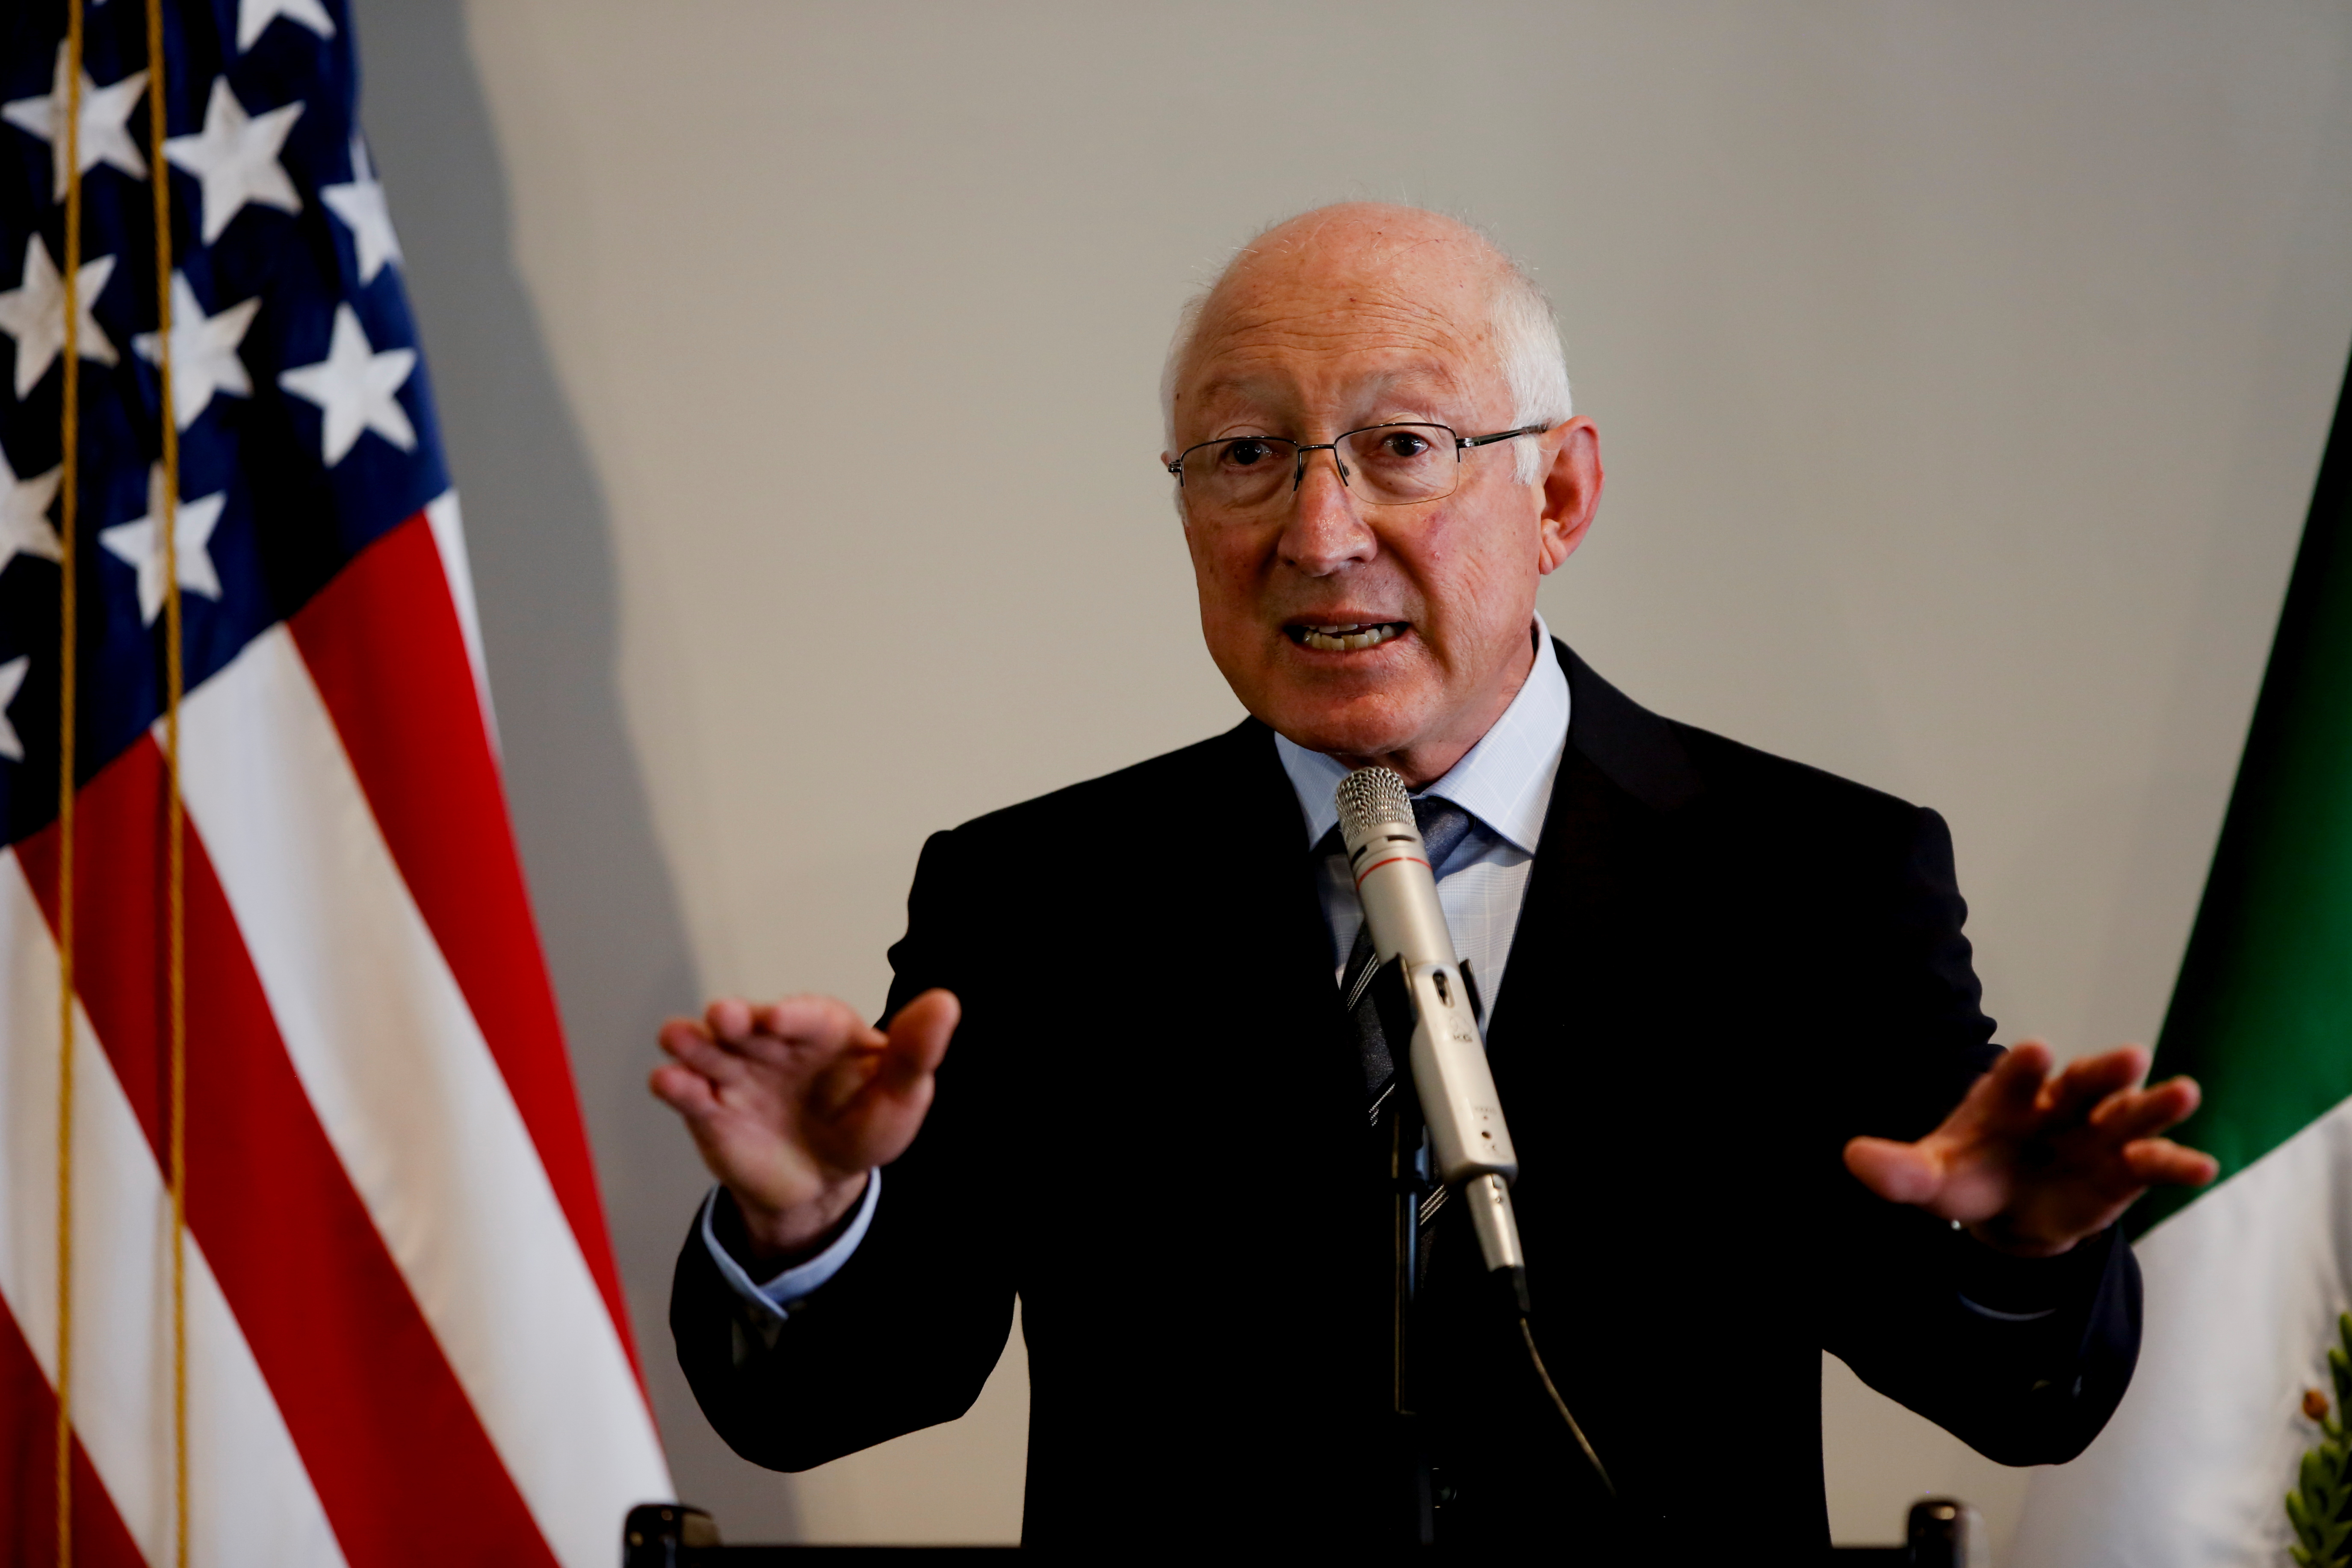 U.S. Ambassador to Mexico Ken Salazar holds news conference in Mexico City